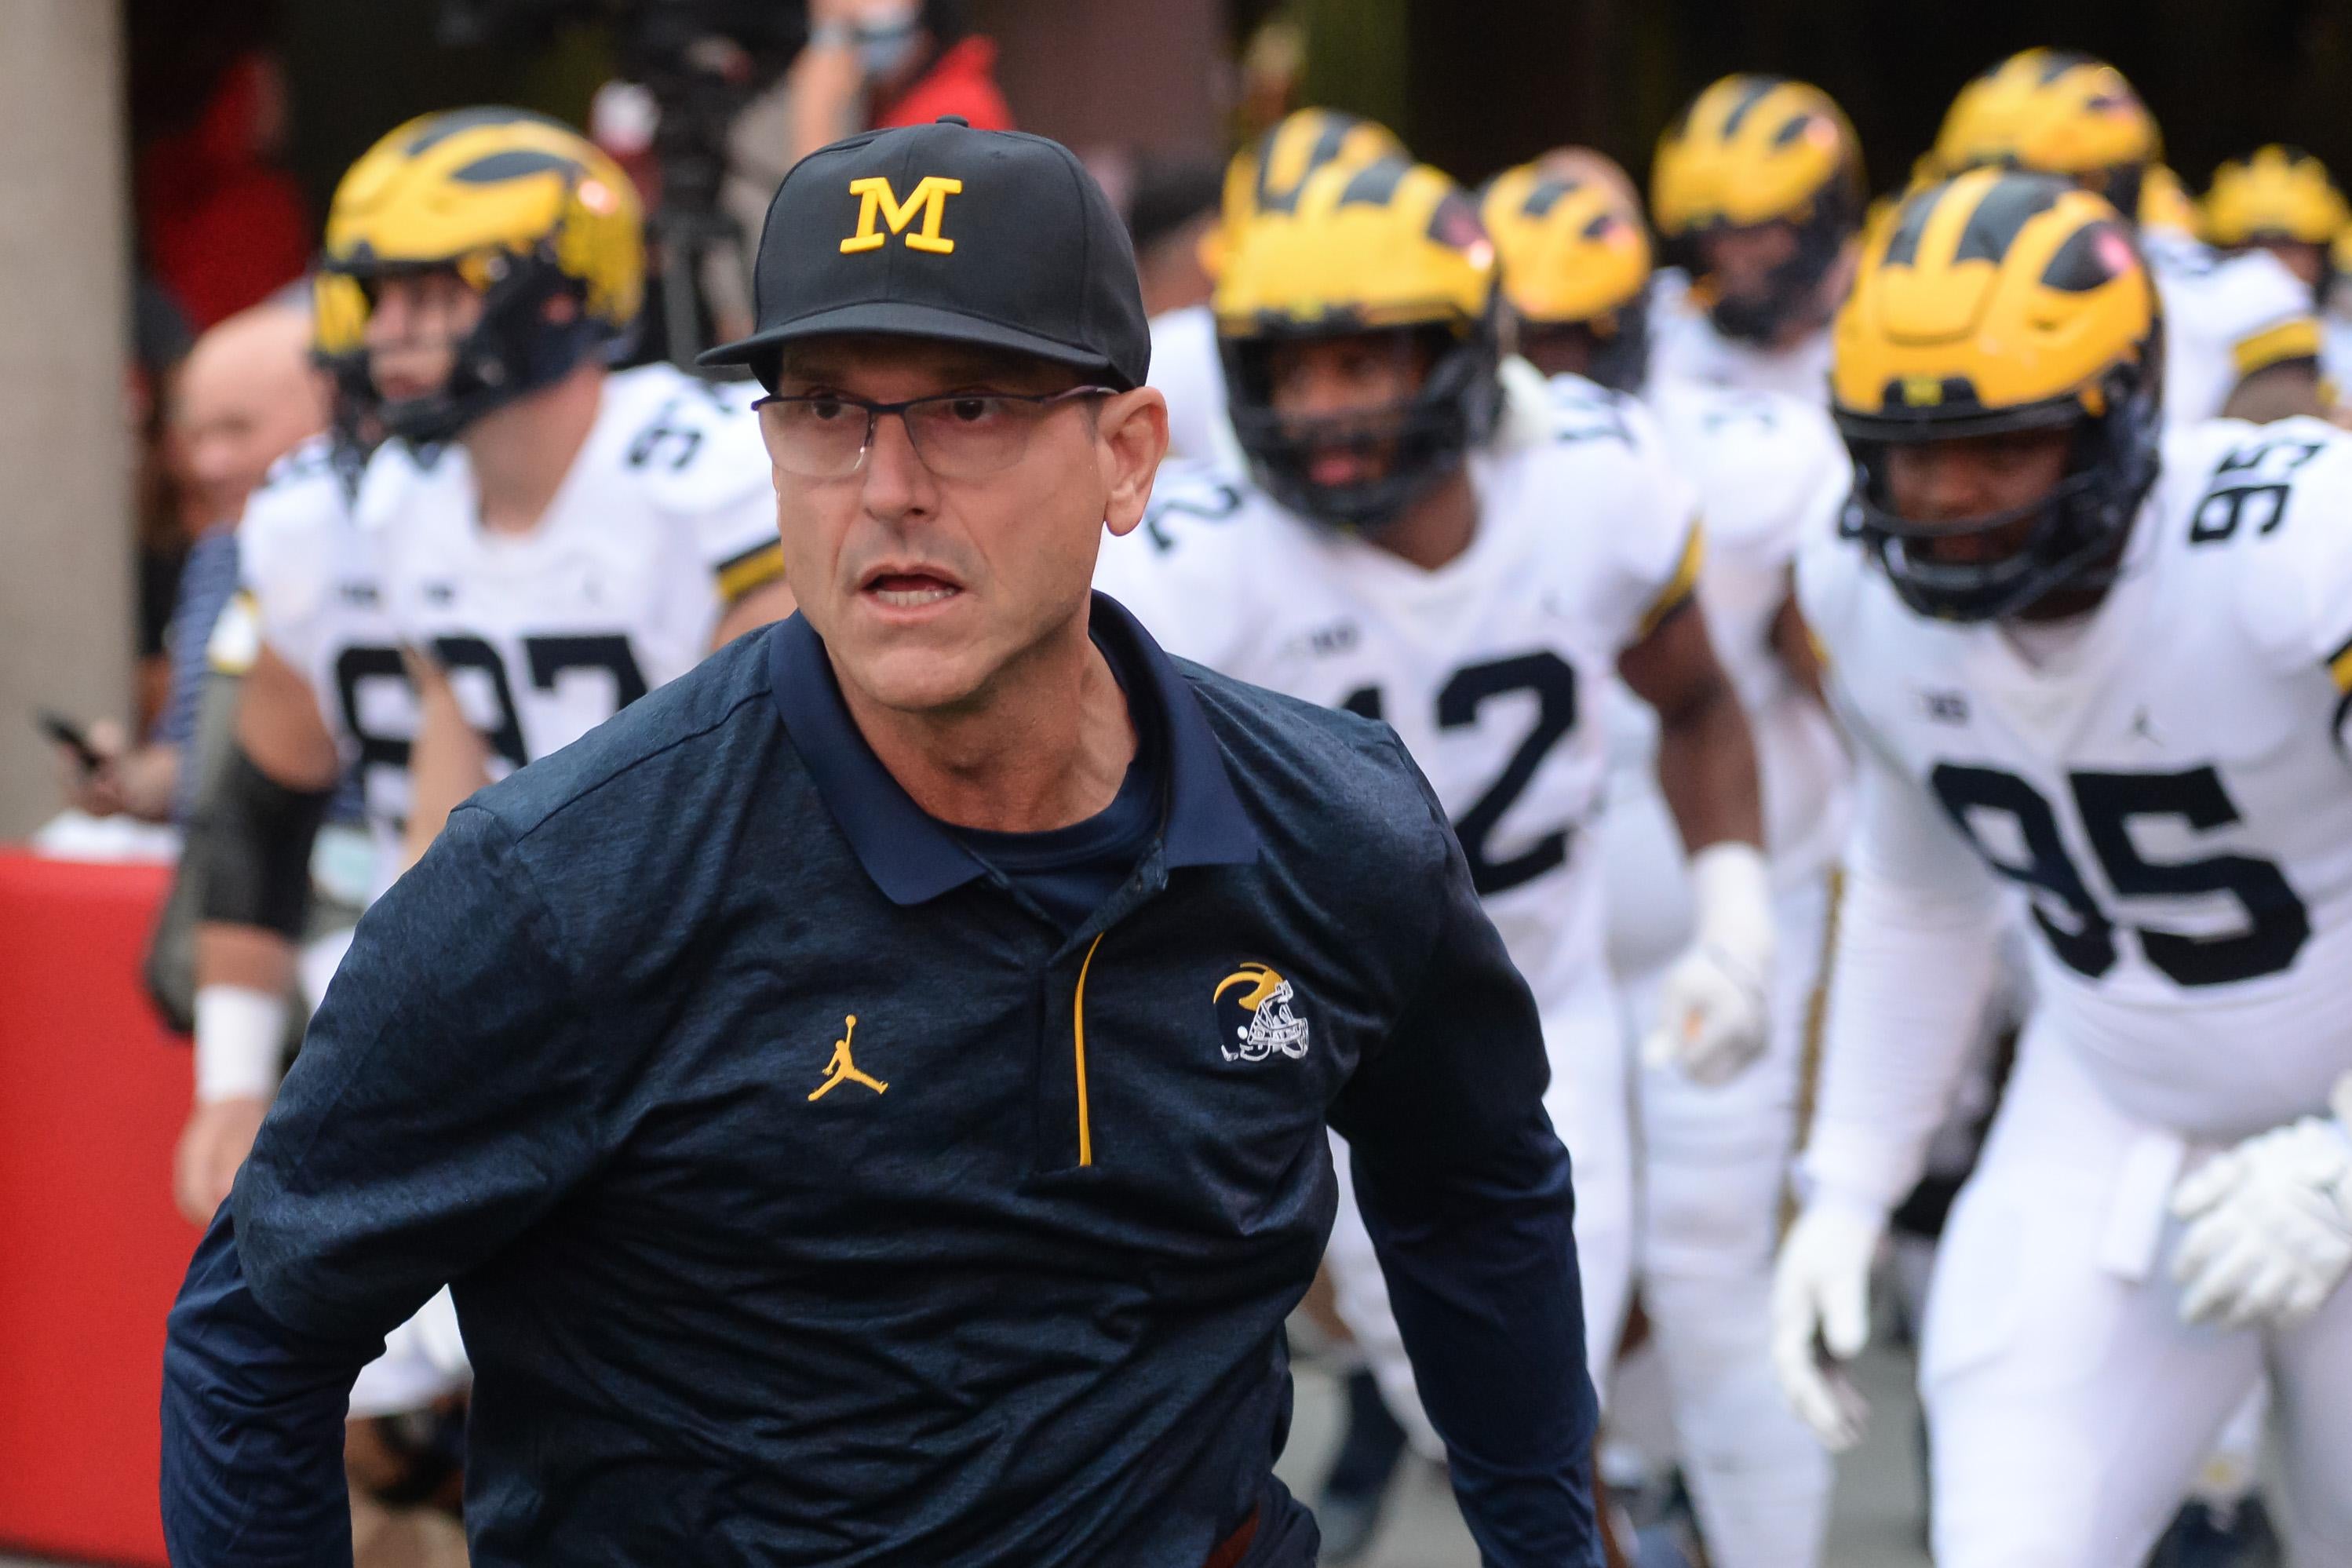 Harbaugh running onto the field with the Michigan players in uniform running behind him